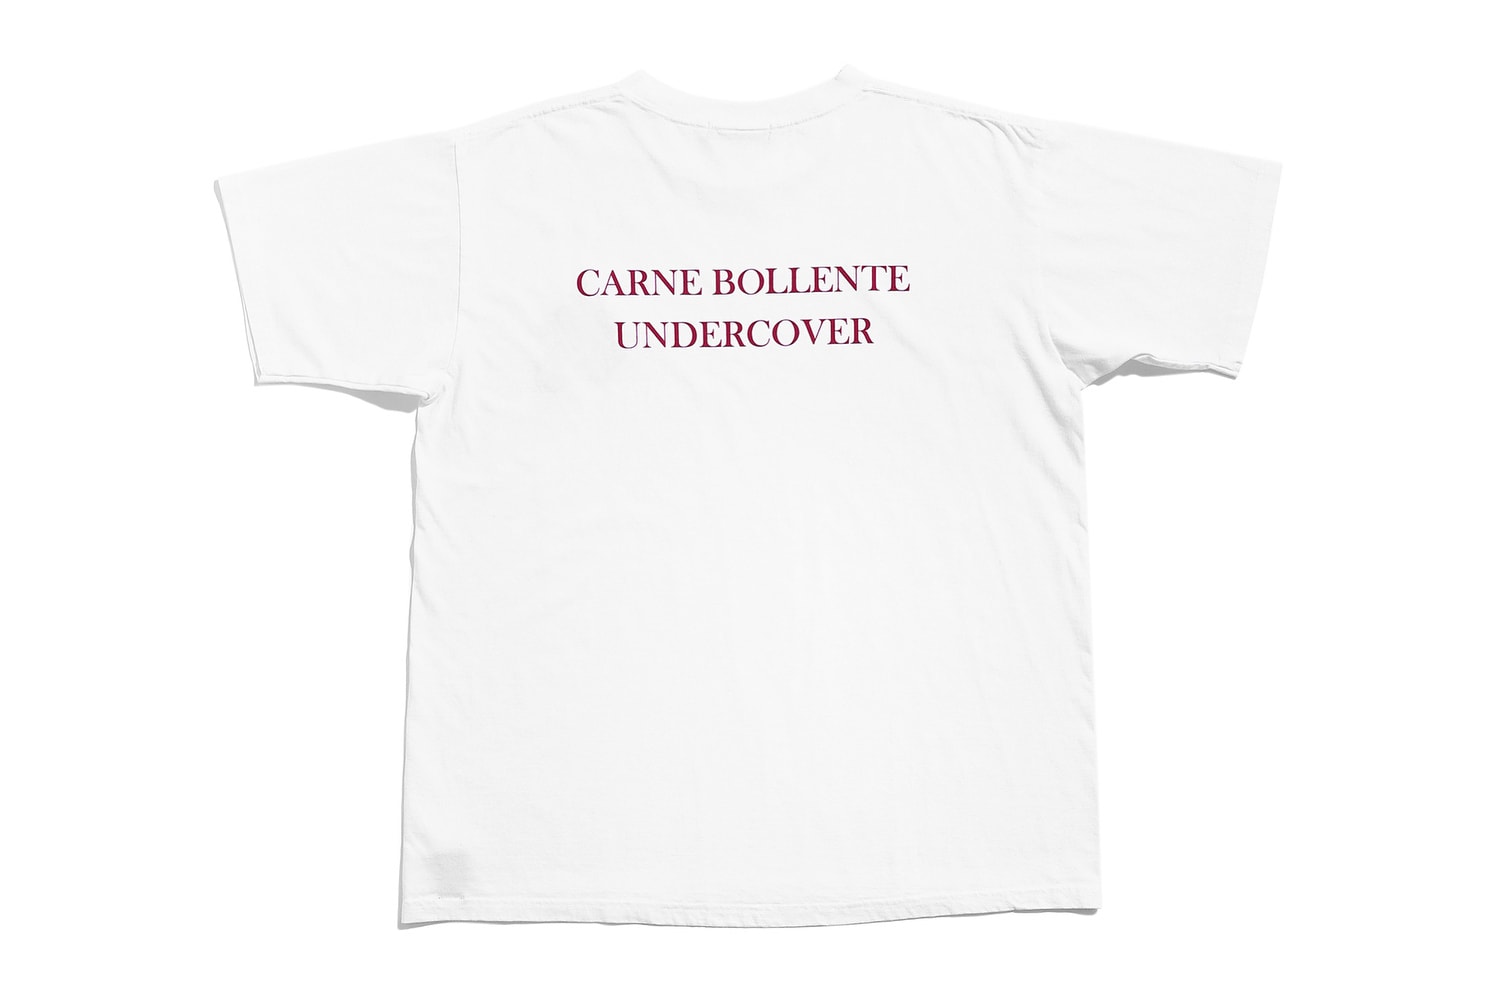 Undercover carne bollente collaboration collection sweater shirt tee tshirt hoodie coaches jacket branding embroidery paris japan madstore drop release date info august 25 2018 purchase sell sale green black white beige